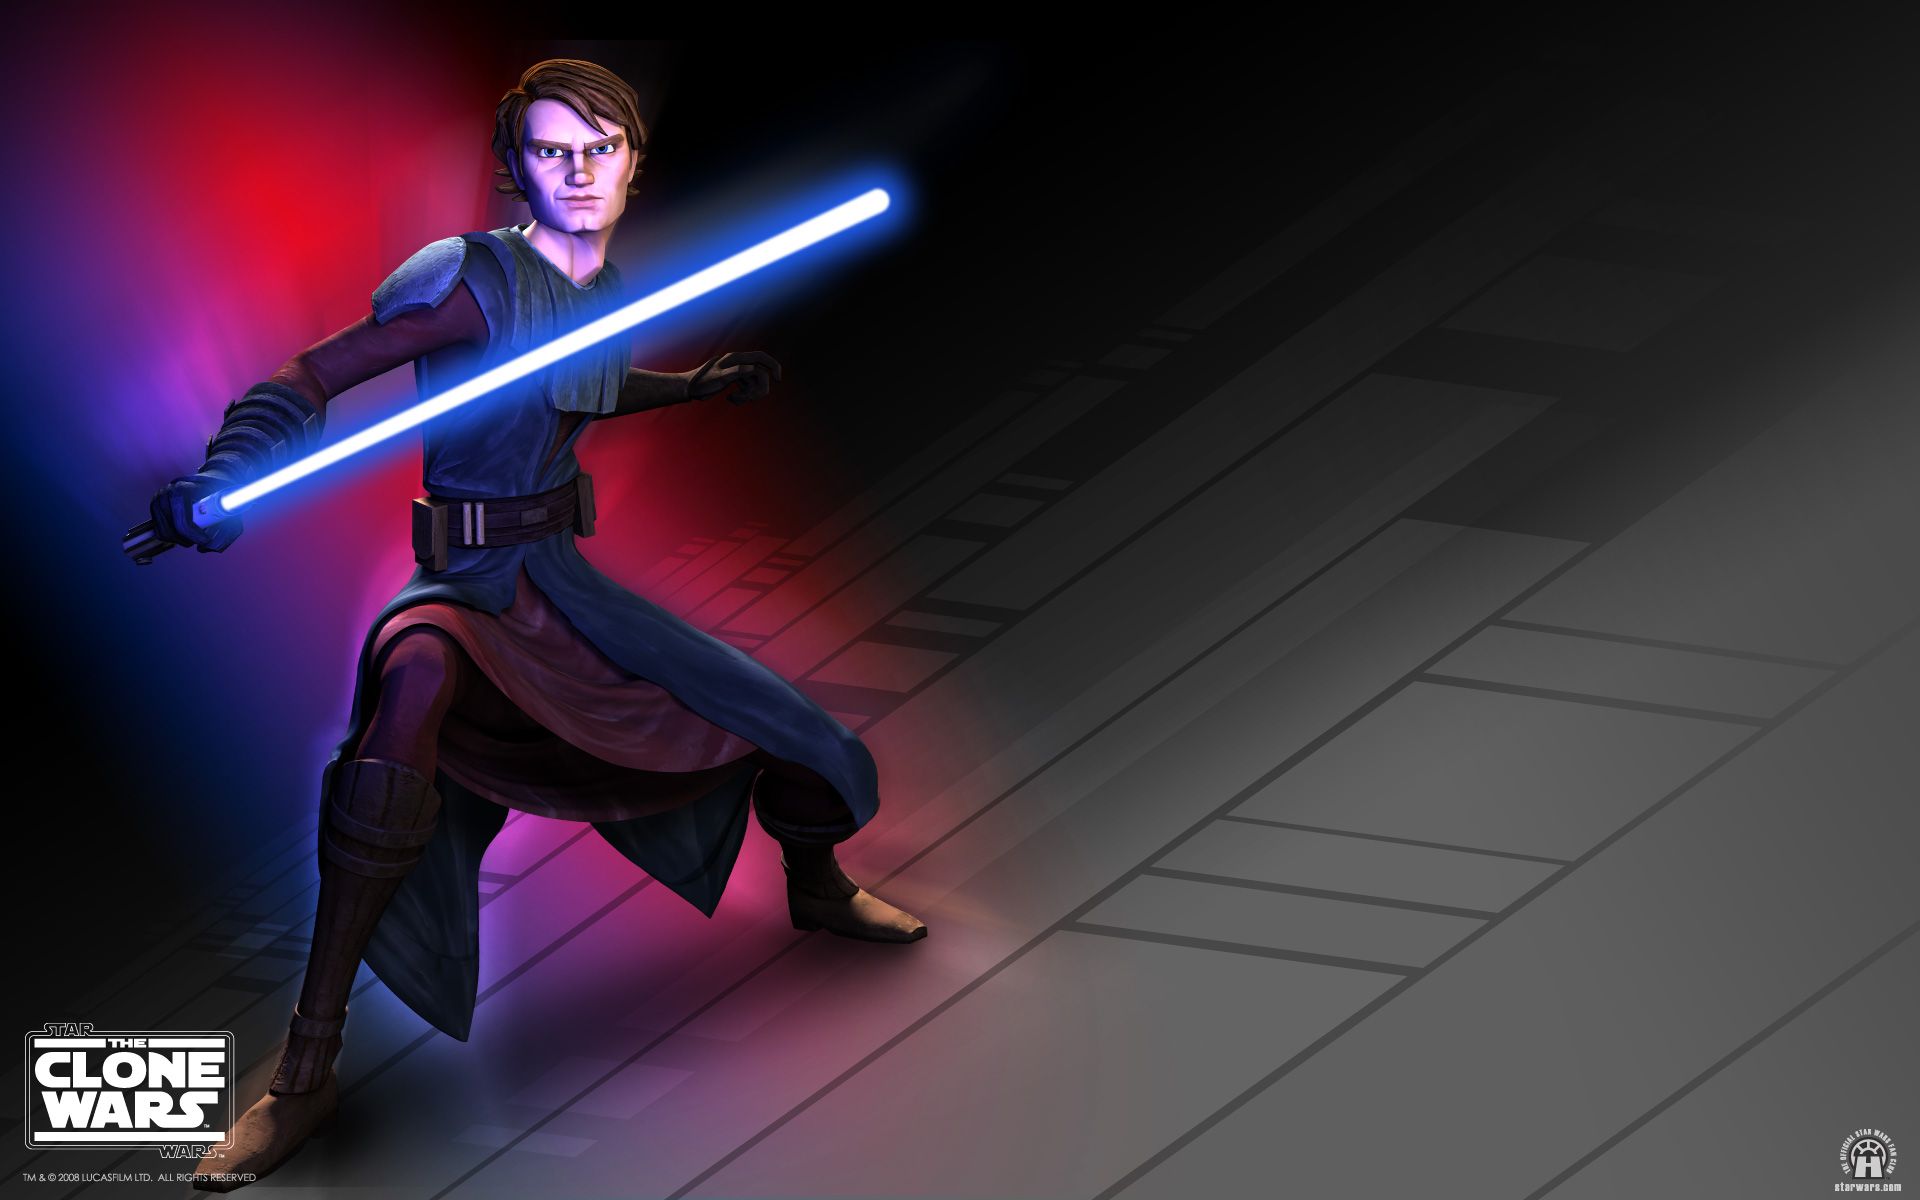 Anakin 4K wallpaper for your desktop or mobile screen free and easy to download